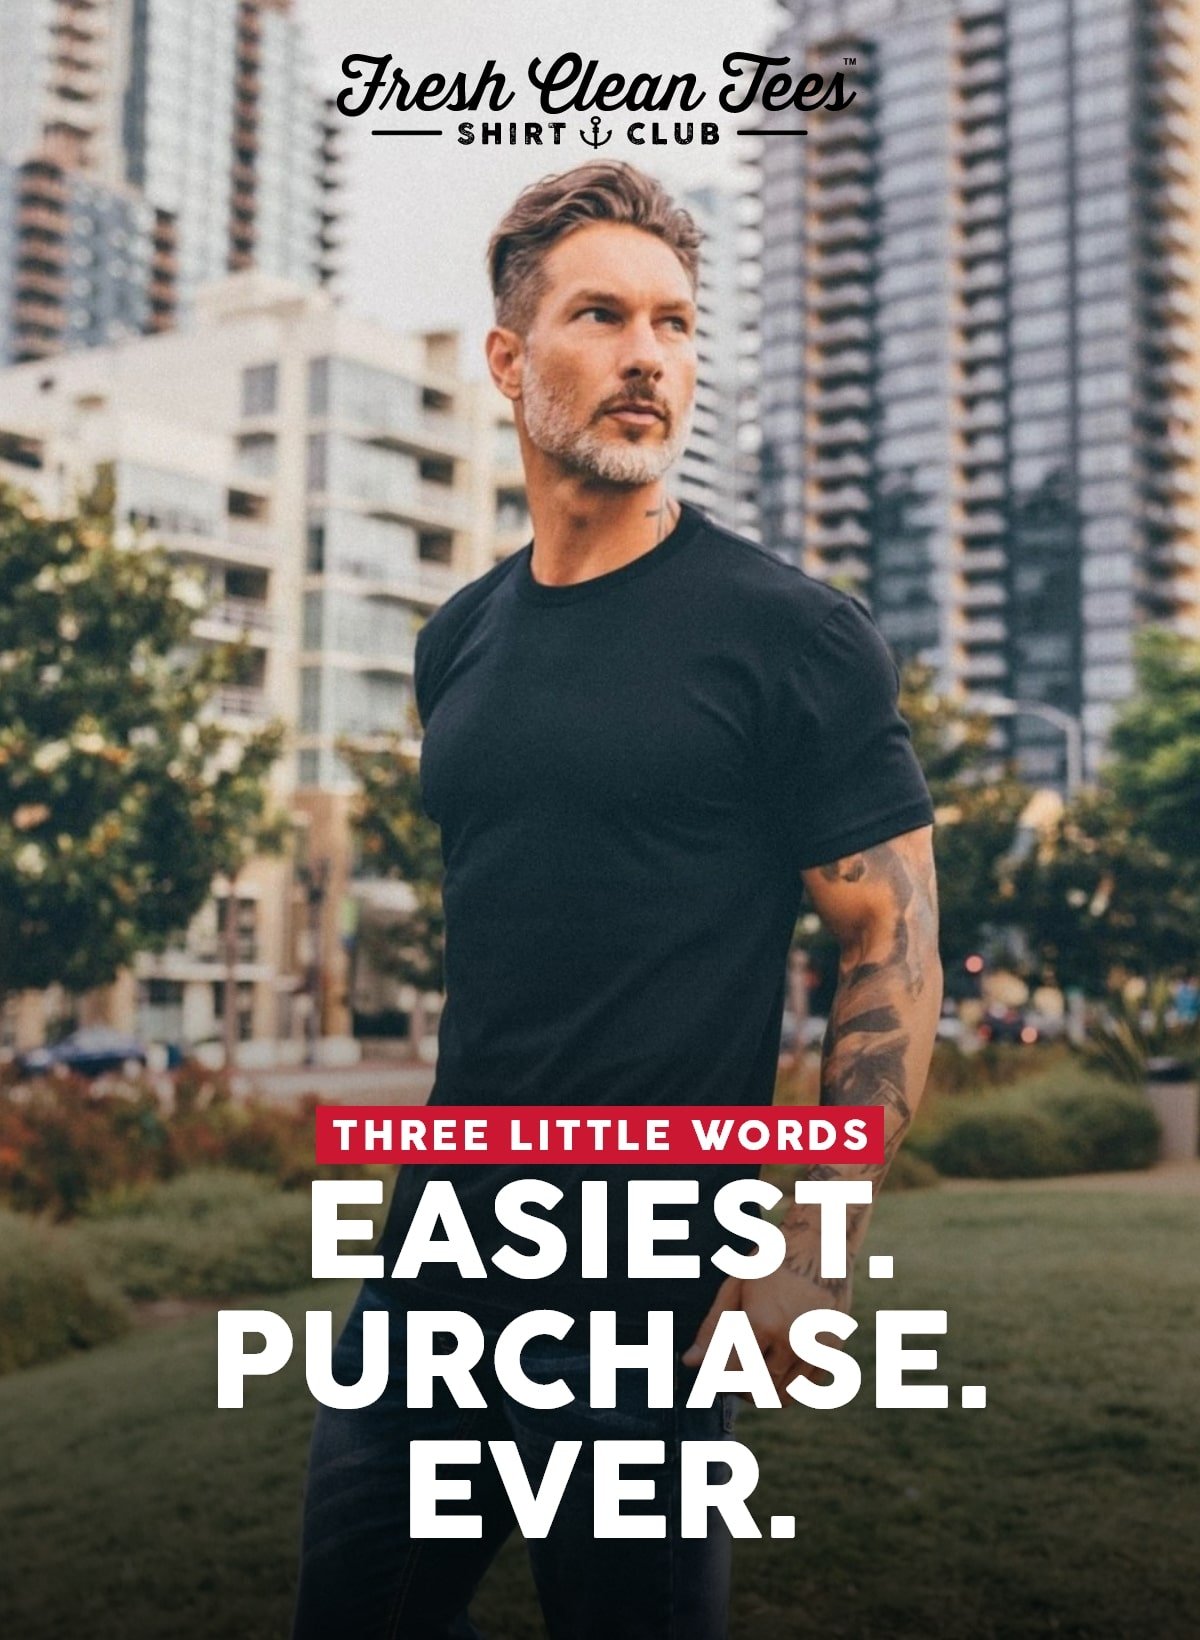 Three Little words | easiest. purchase. ever.